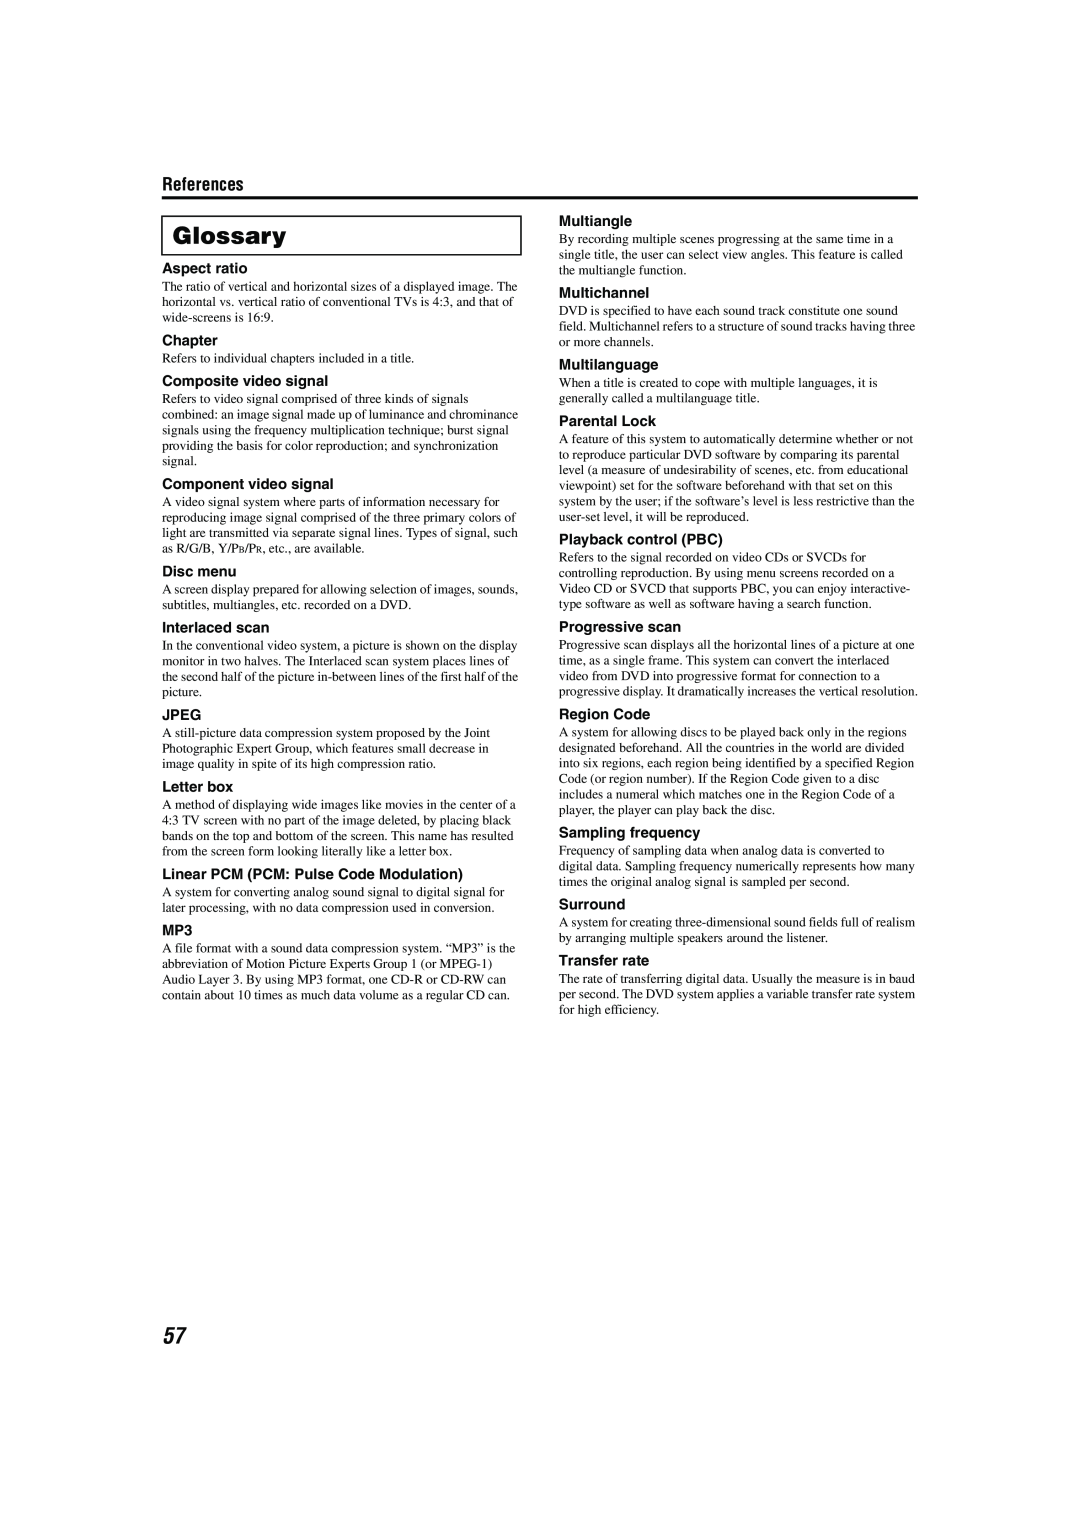 JVC TH-M42 manual Glossary, References 